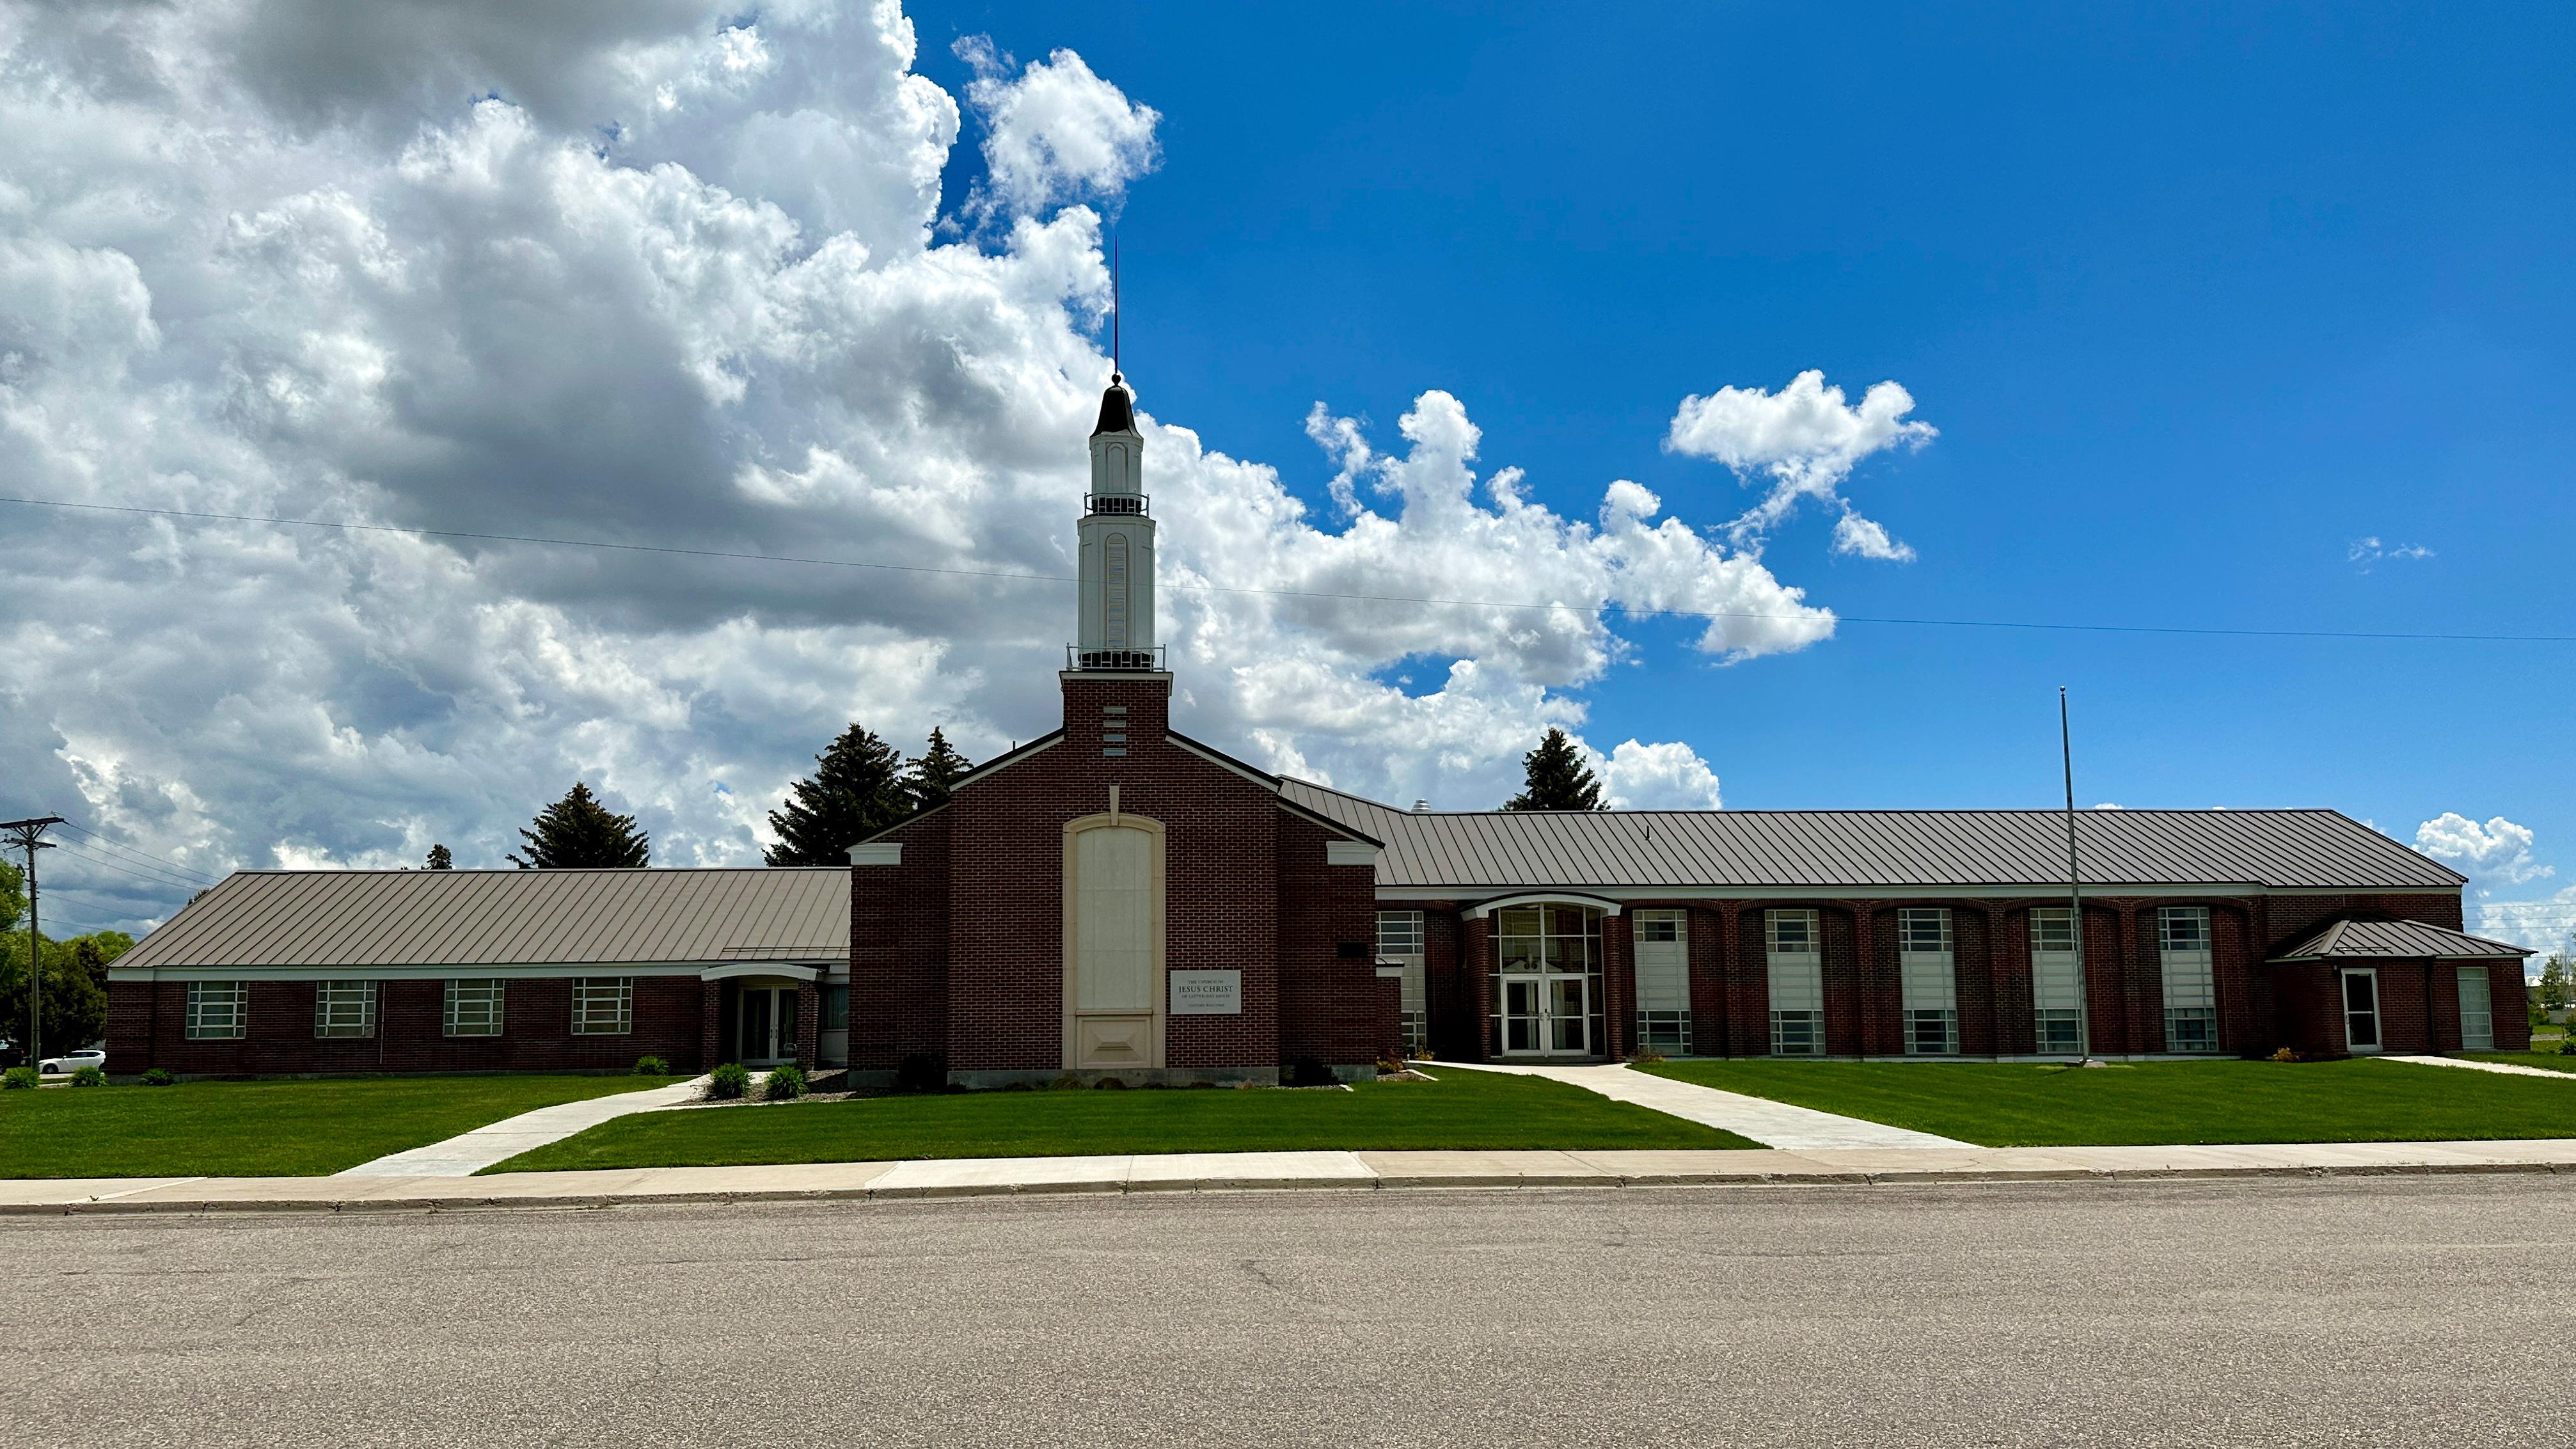 The Bancroft church building in the Grace Idaho Stake in the Church of Jesus Christ of Latter-day Saints.